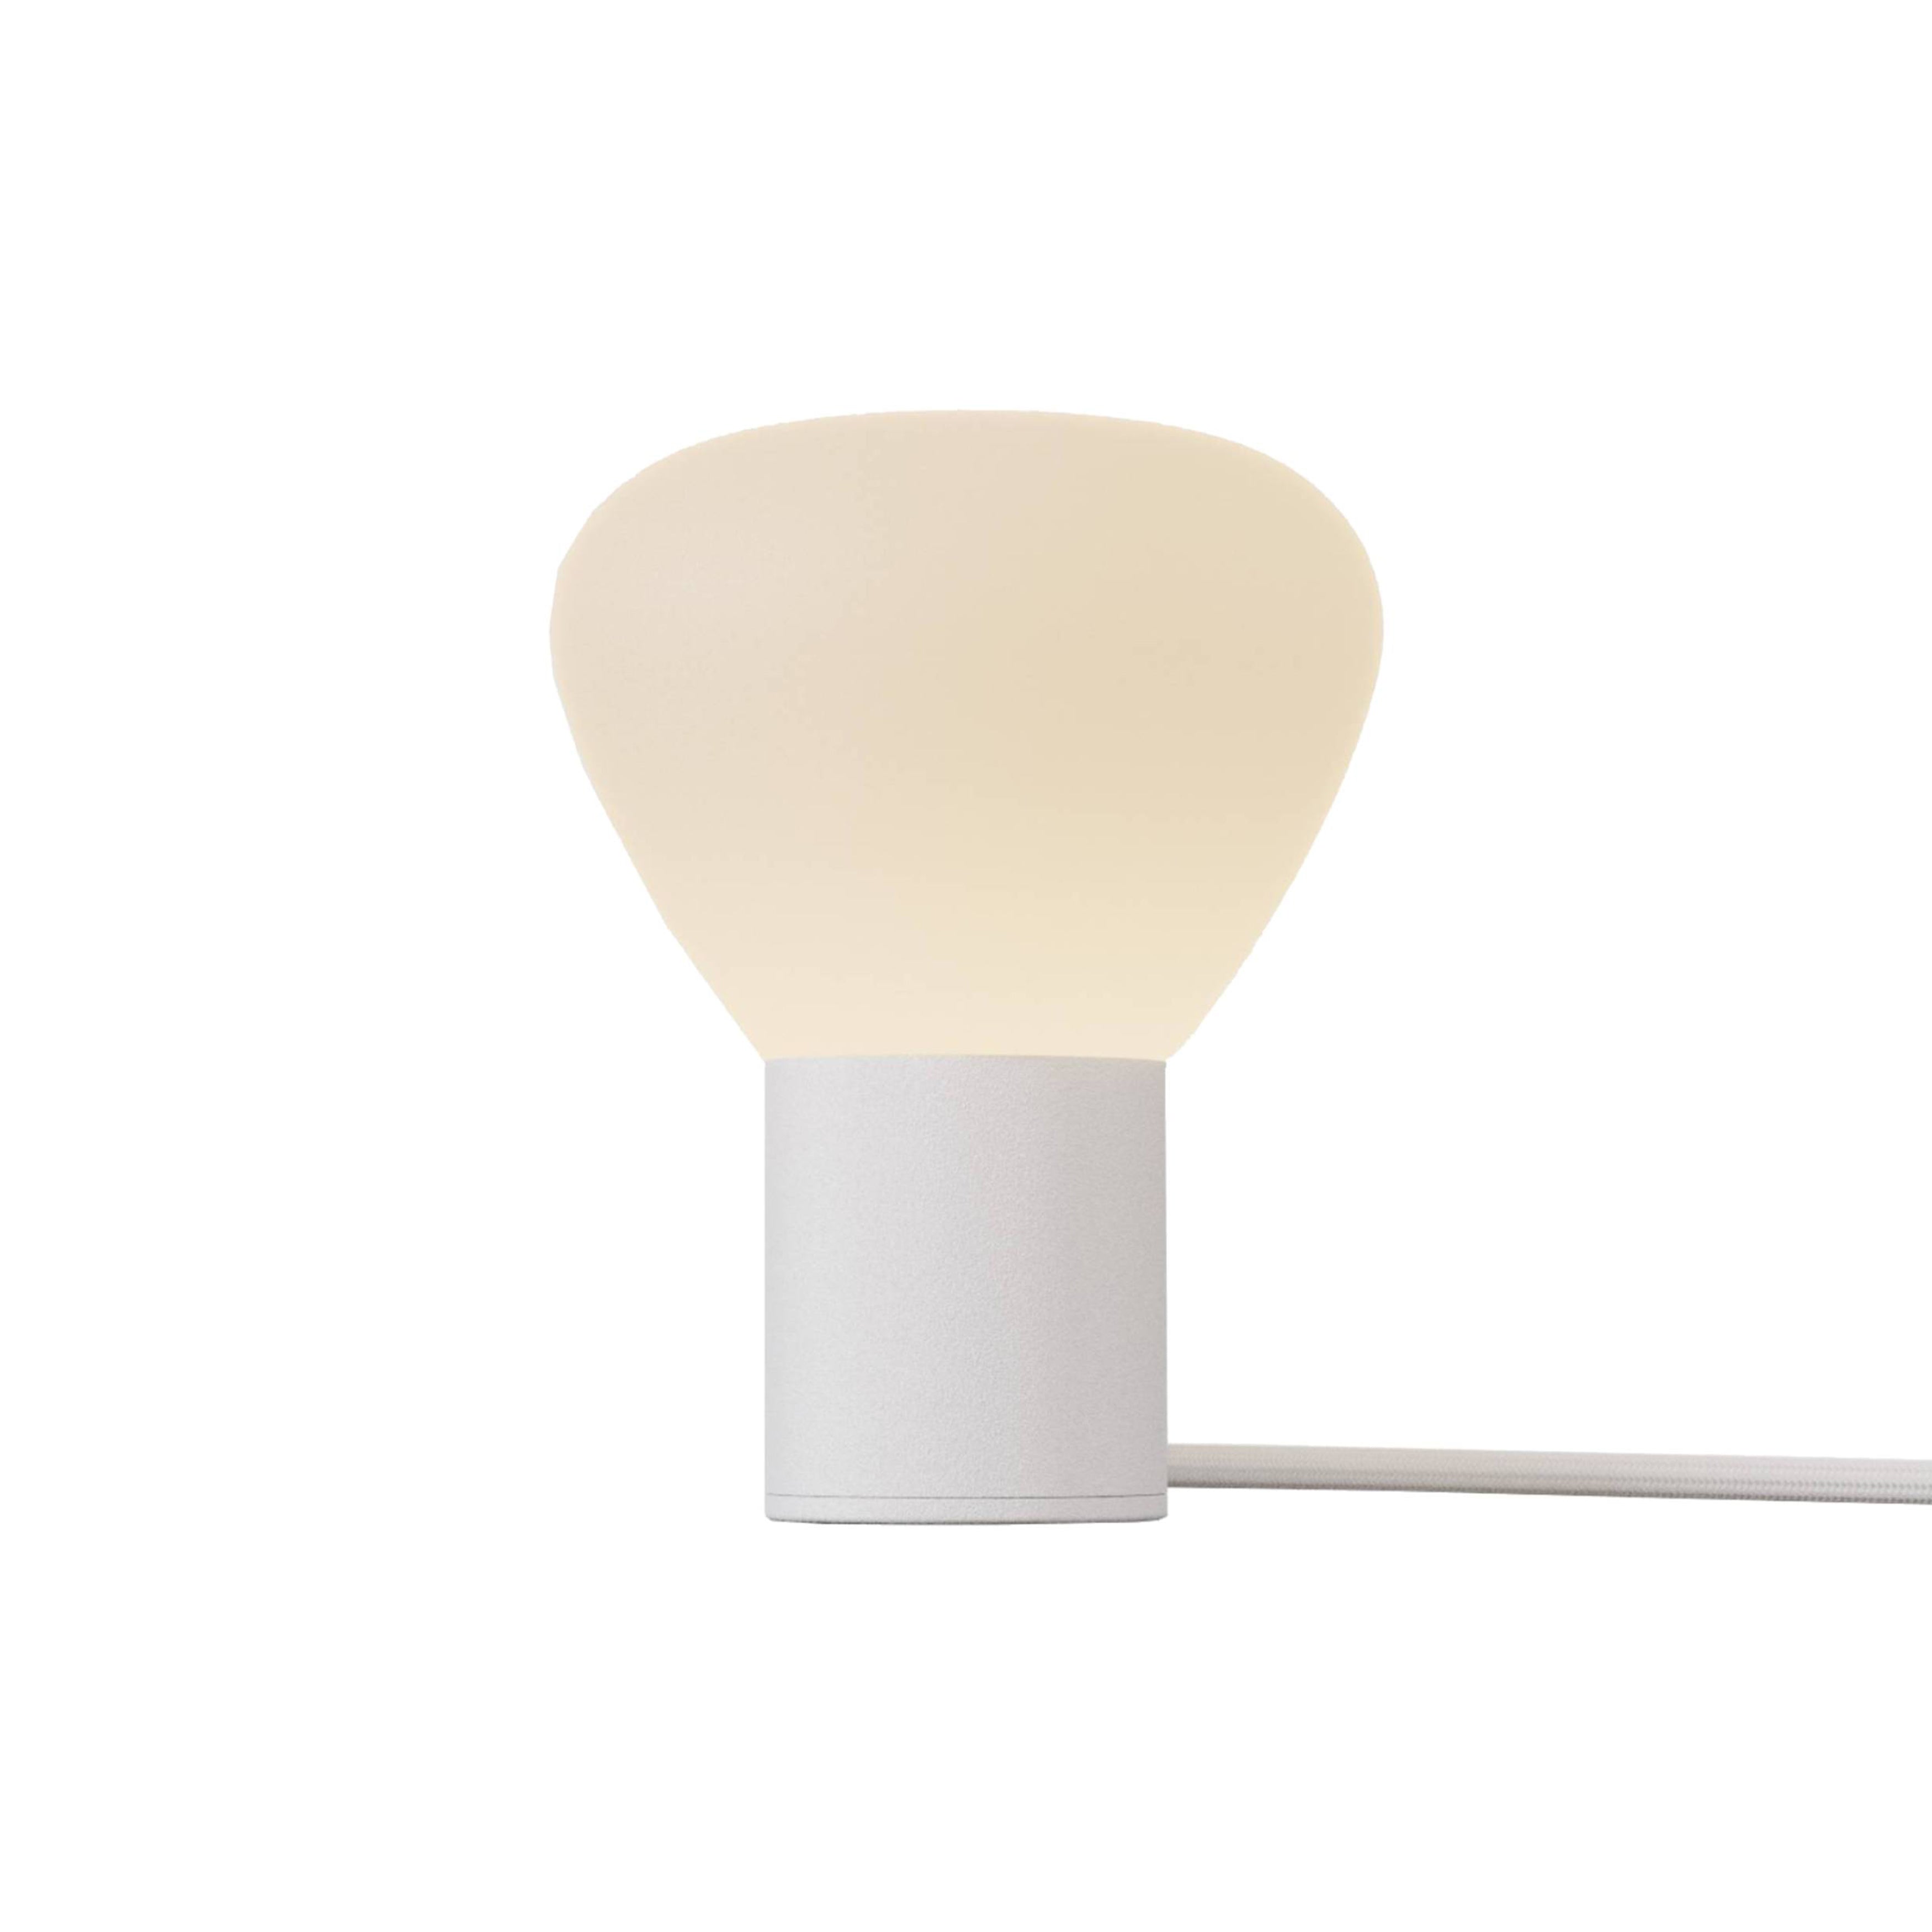 Parc 01 Table Lamp: Handswitch +  White + White